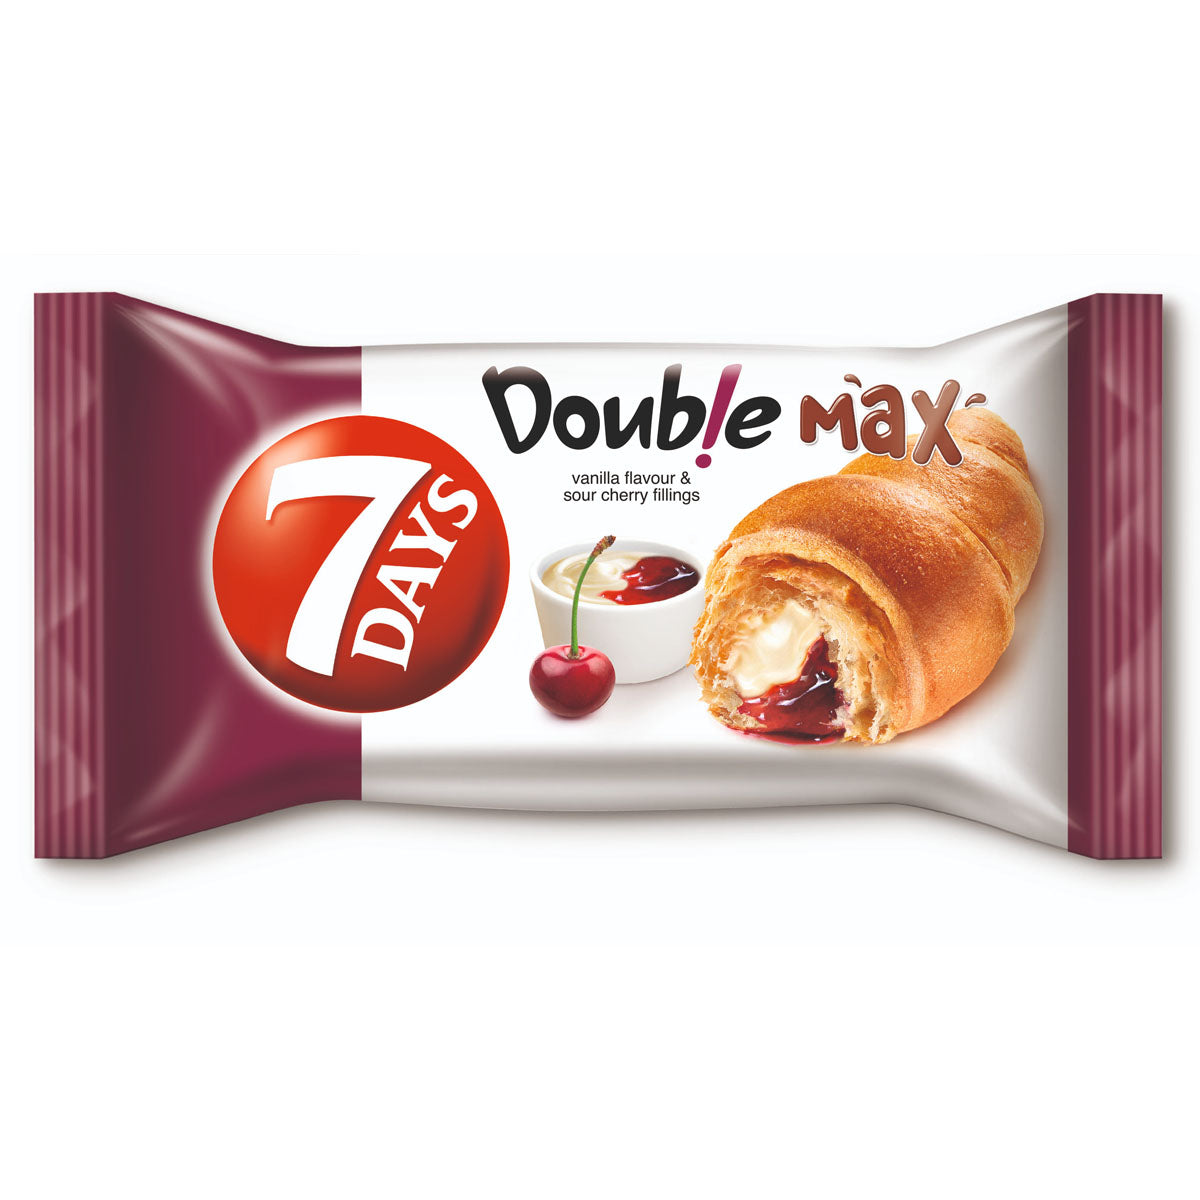 7 Days - Double Vanilla & Cherry Croissant - 80g - Continental Food Store